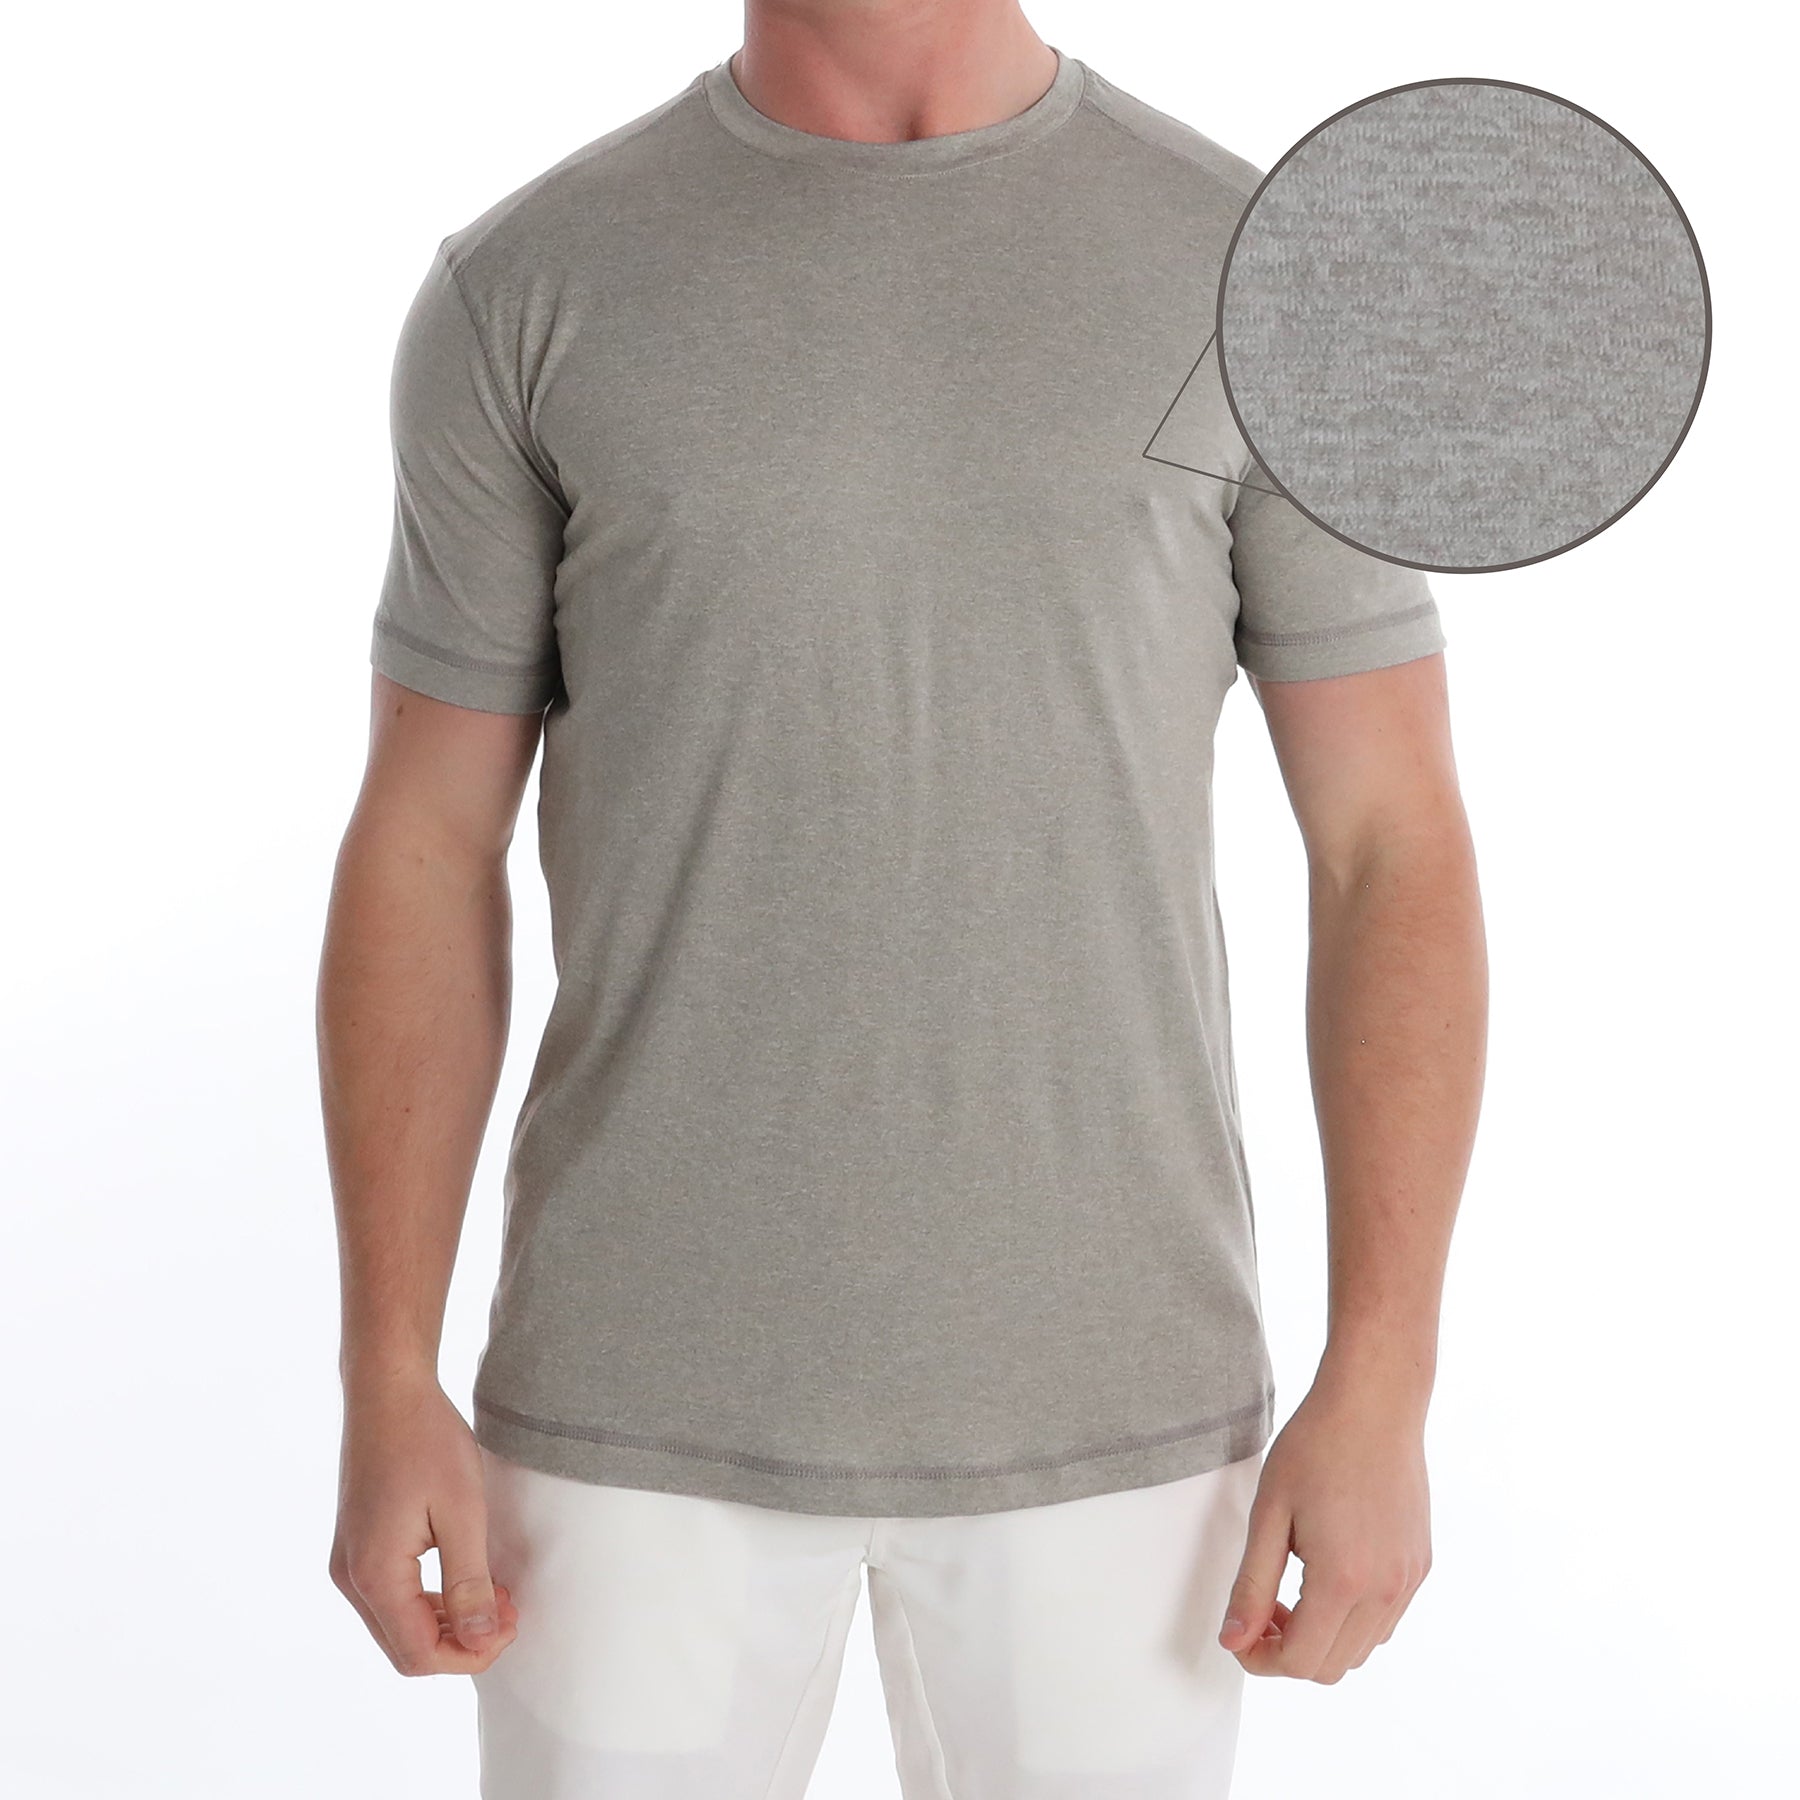 BUTTER T - GREY HEATHER